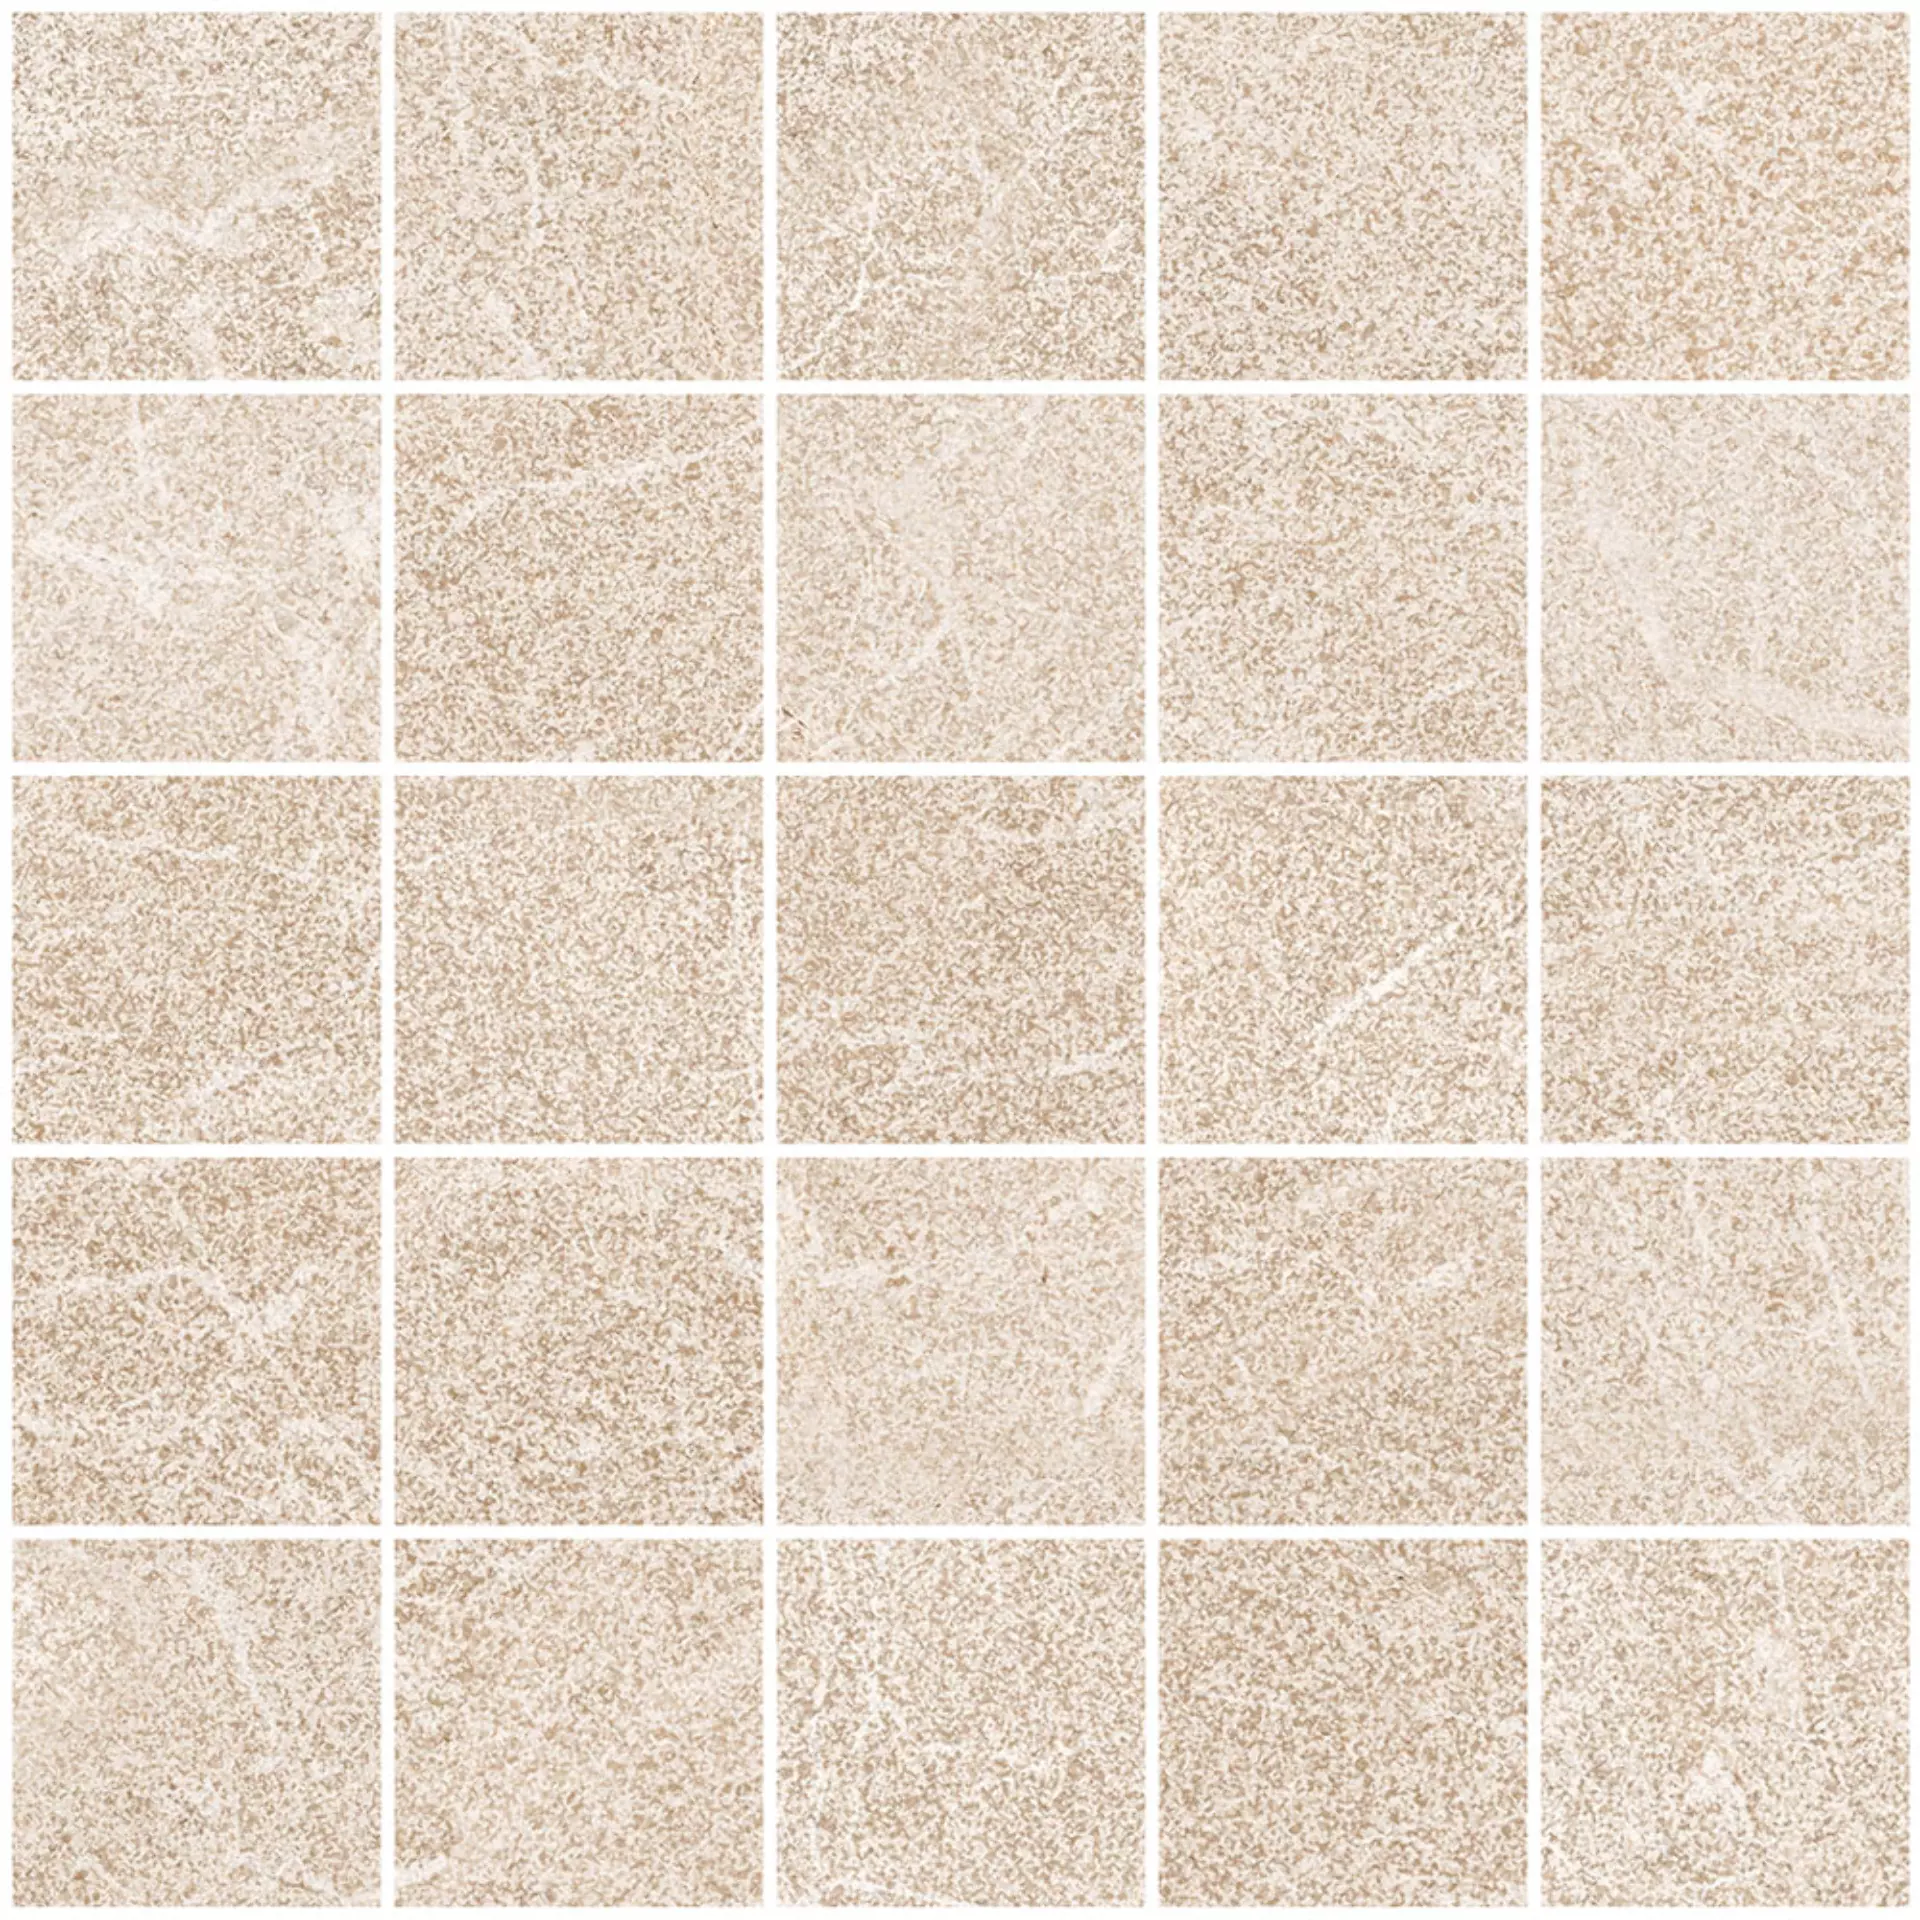 Sant Agostino Unionstone 2 Oriental Beige Natural Mosaic CSAMORBE30 30x30cm rectified 10mm